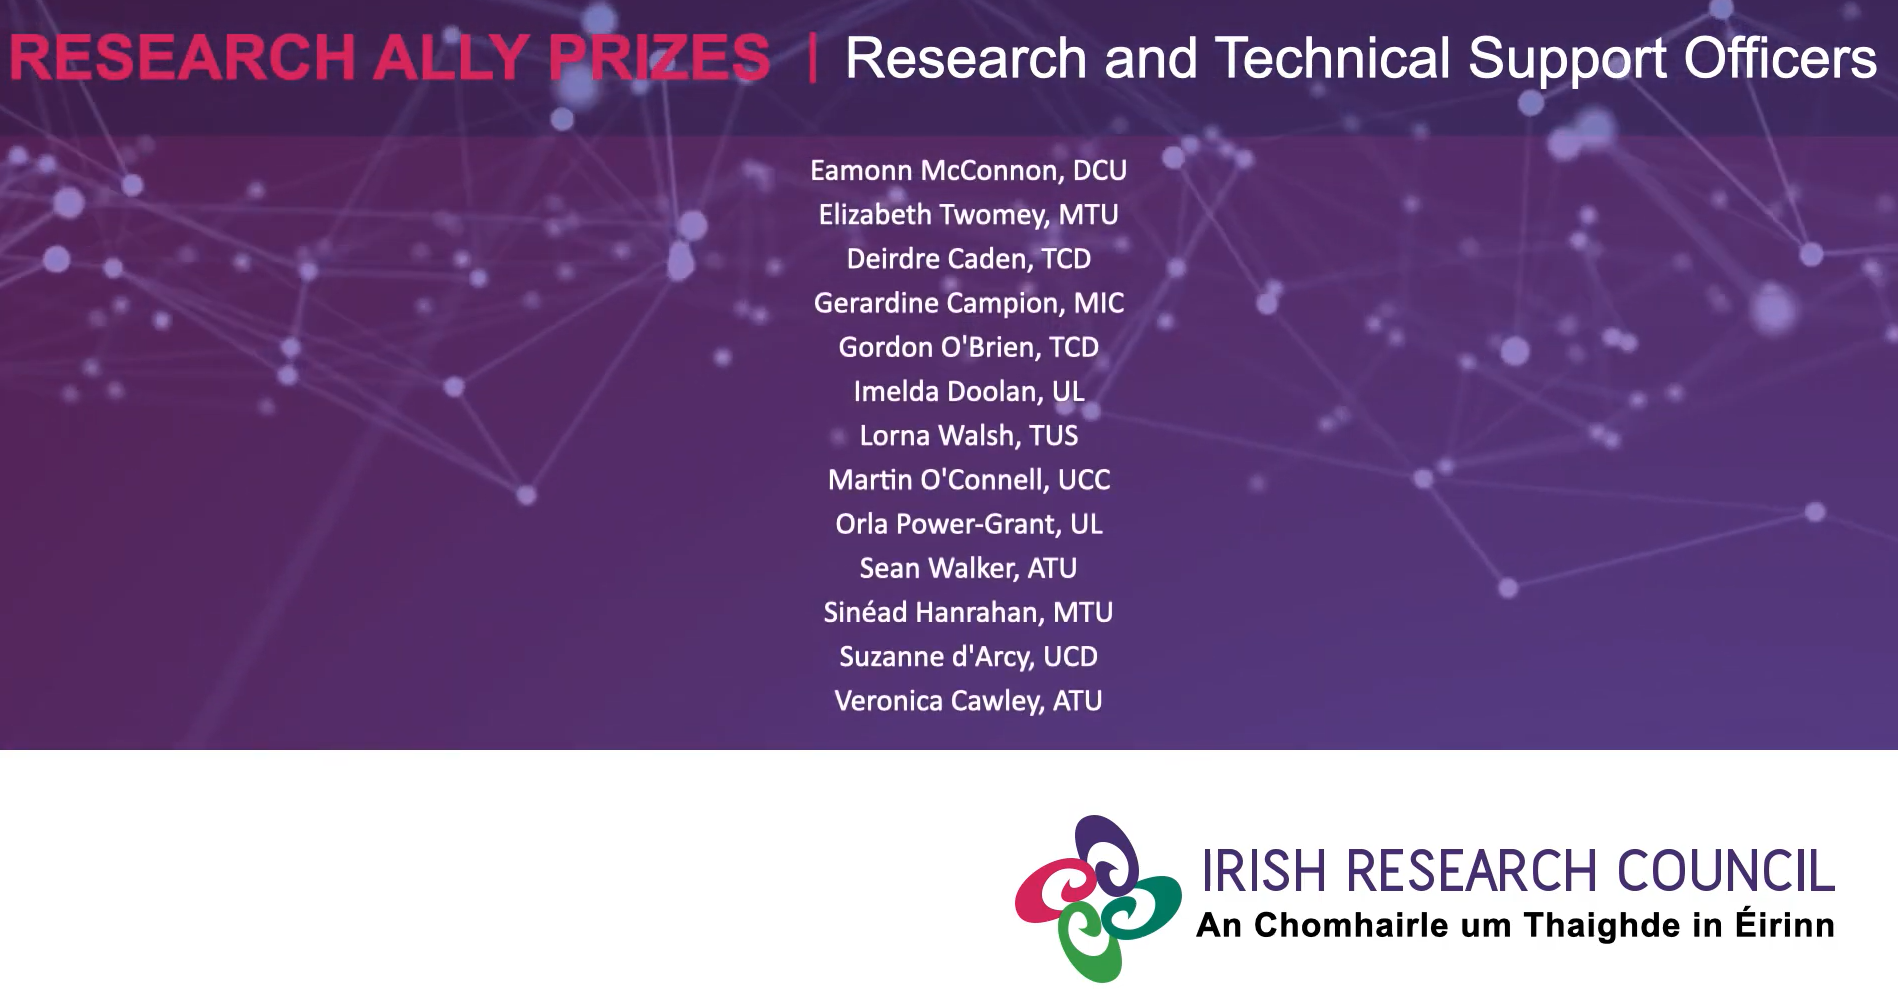 Research Ally winners 2022